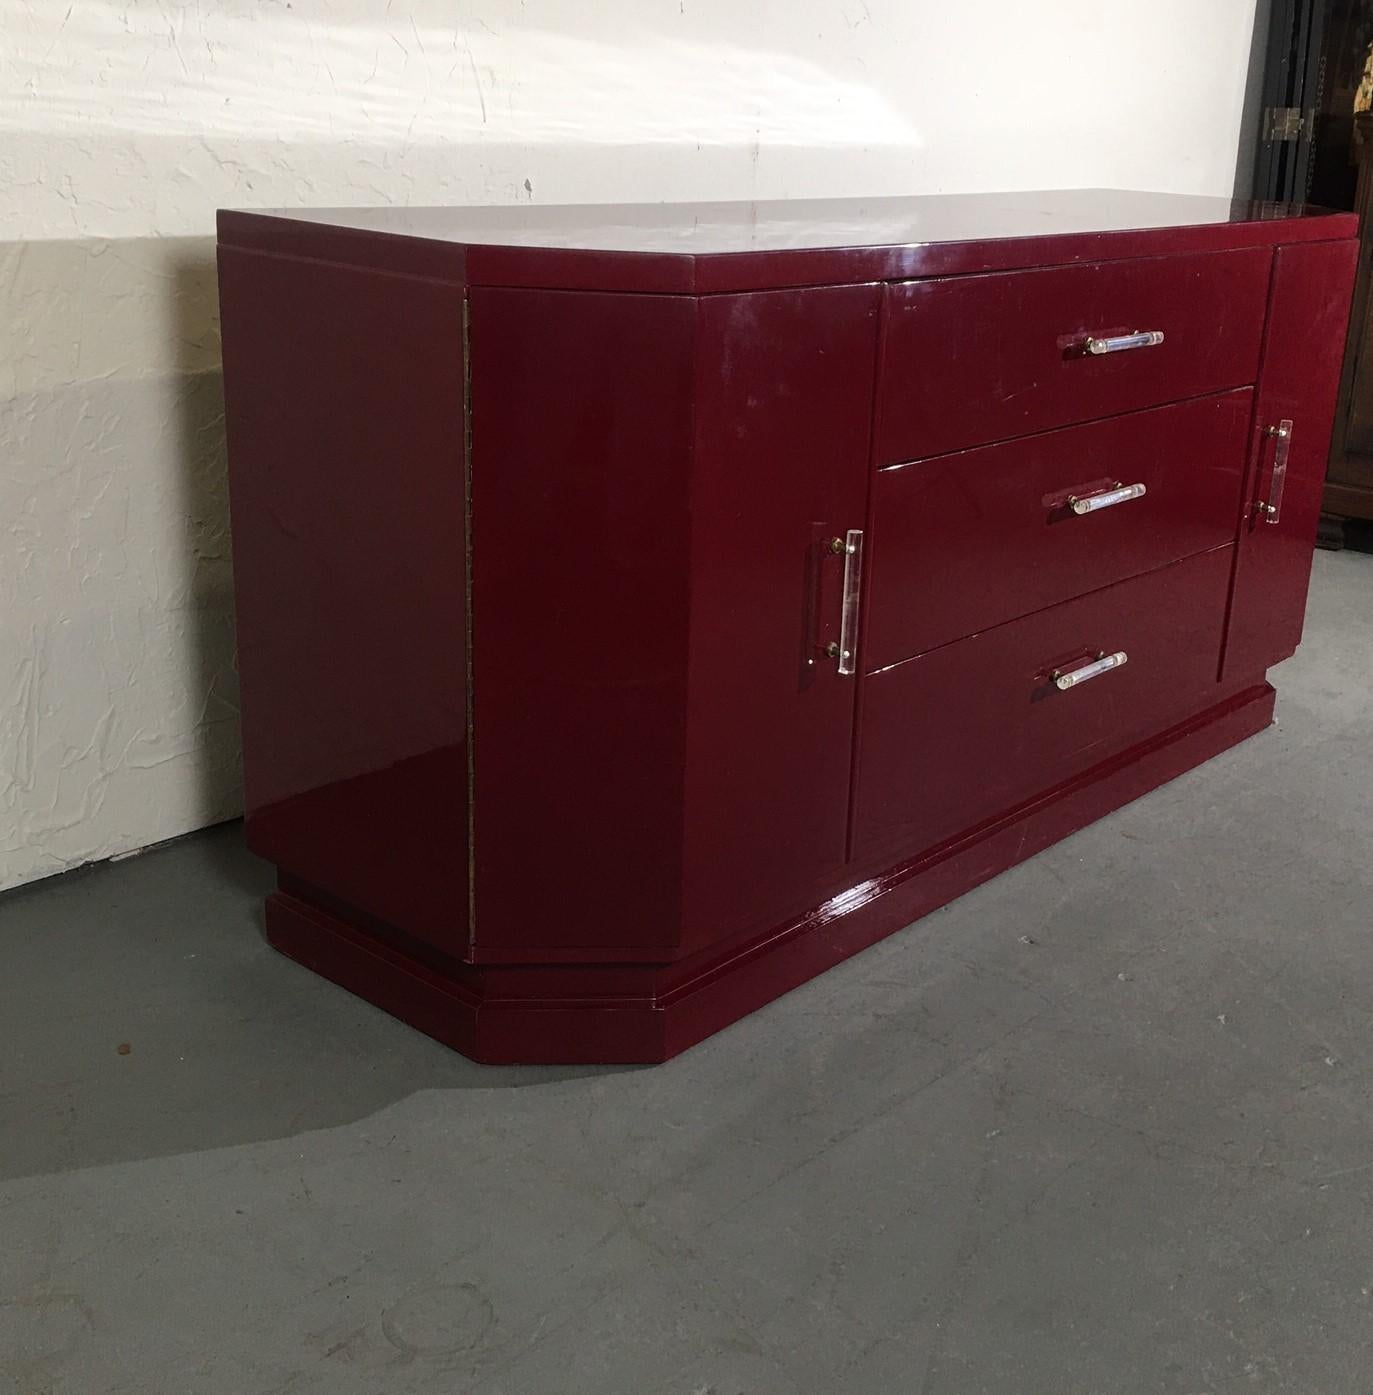 Fine quality lacquered finished Italian credenza. Beautiful rich color, clean lines with lots of storage. The handles are made of lucite.